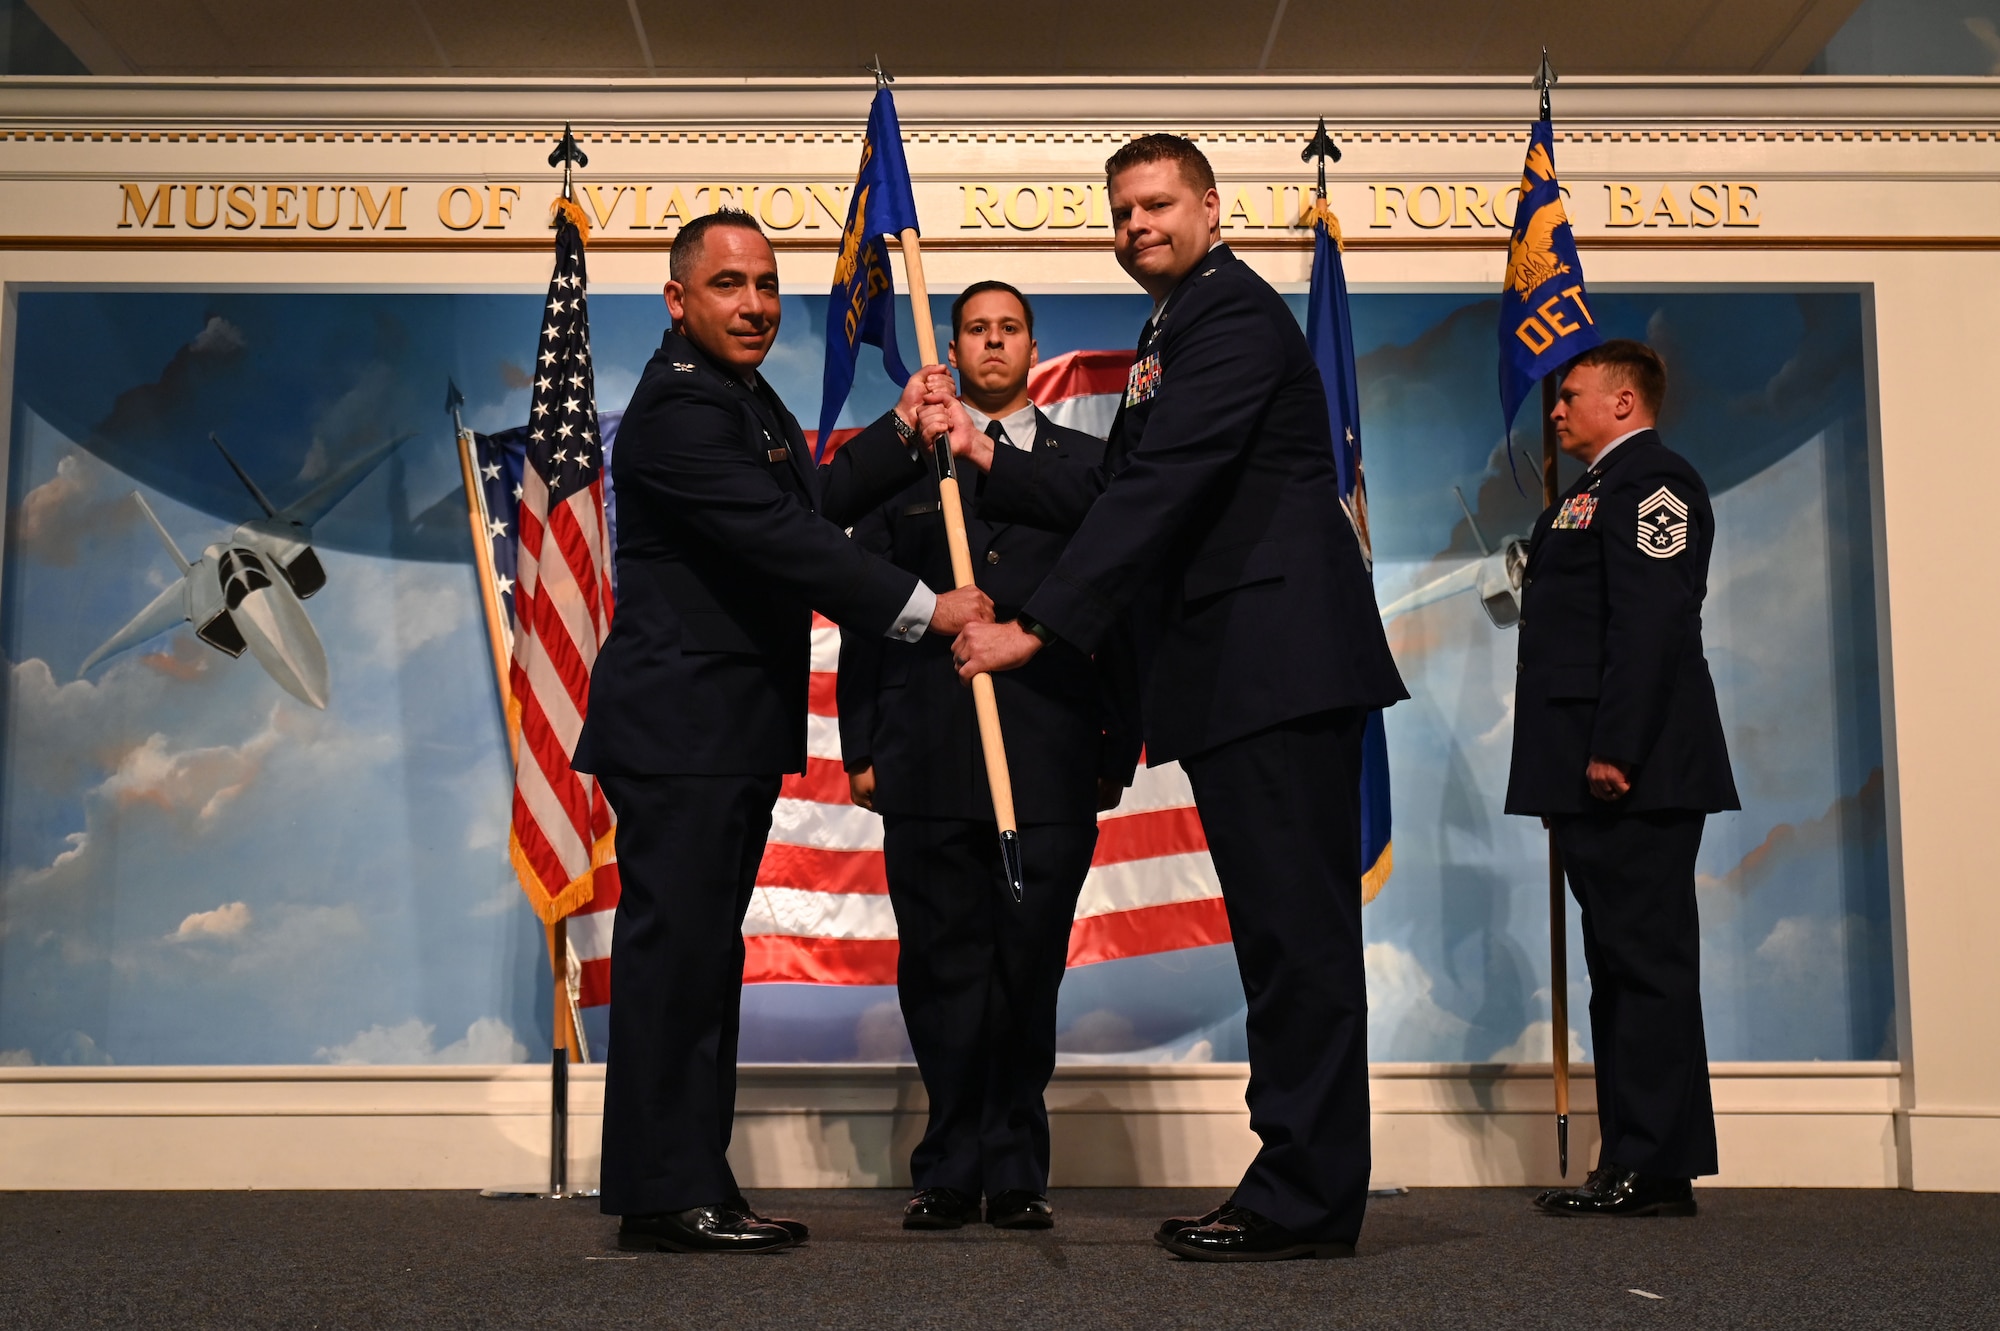 U.S. Air Force Col. Josh Koslov, 350th Spectrum Warfare Wing commander, left, passes the 350th SWW Det 1 guidon to U.S. Air Force Lt. Col. Christopher Ryan Cox, 350th SWW, Det 1 and 87th Electronic Warfare Squadron, Det 1 commander, right, at Robin Air Force Base, GA, Oct. 25, 2023. The activation of the 350th SWW, Det 1 is driven by the need for a dedicated focus on ensuring electronic warfare weapons systems will achieve combatant commanders’ intent when it matters most; in combat, as a unified fighting force. (U.S. Air Force photo by Staff Sgt. Ericka A. Woolever)